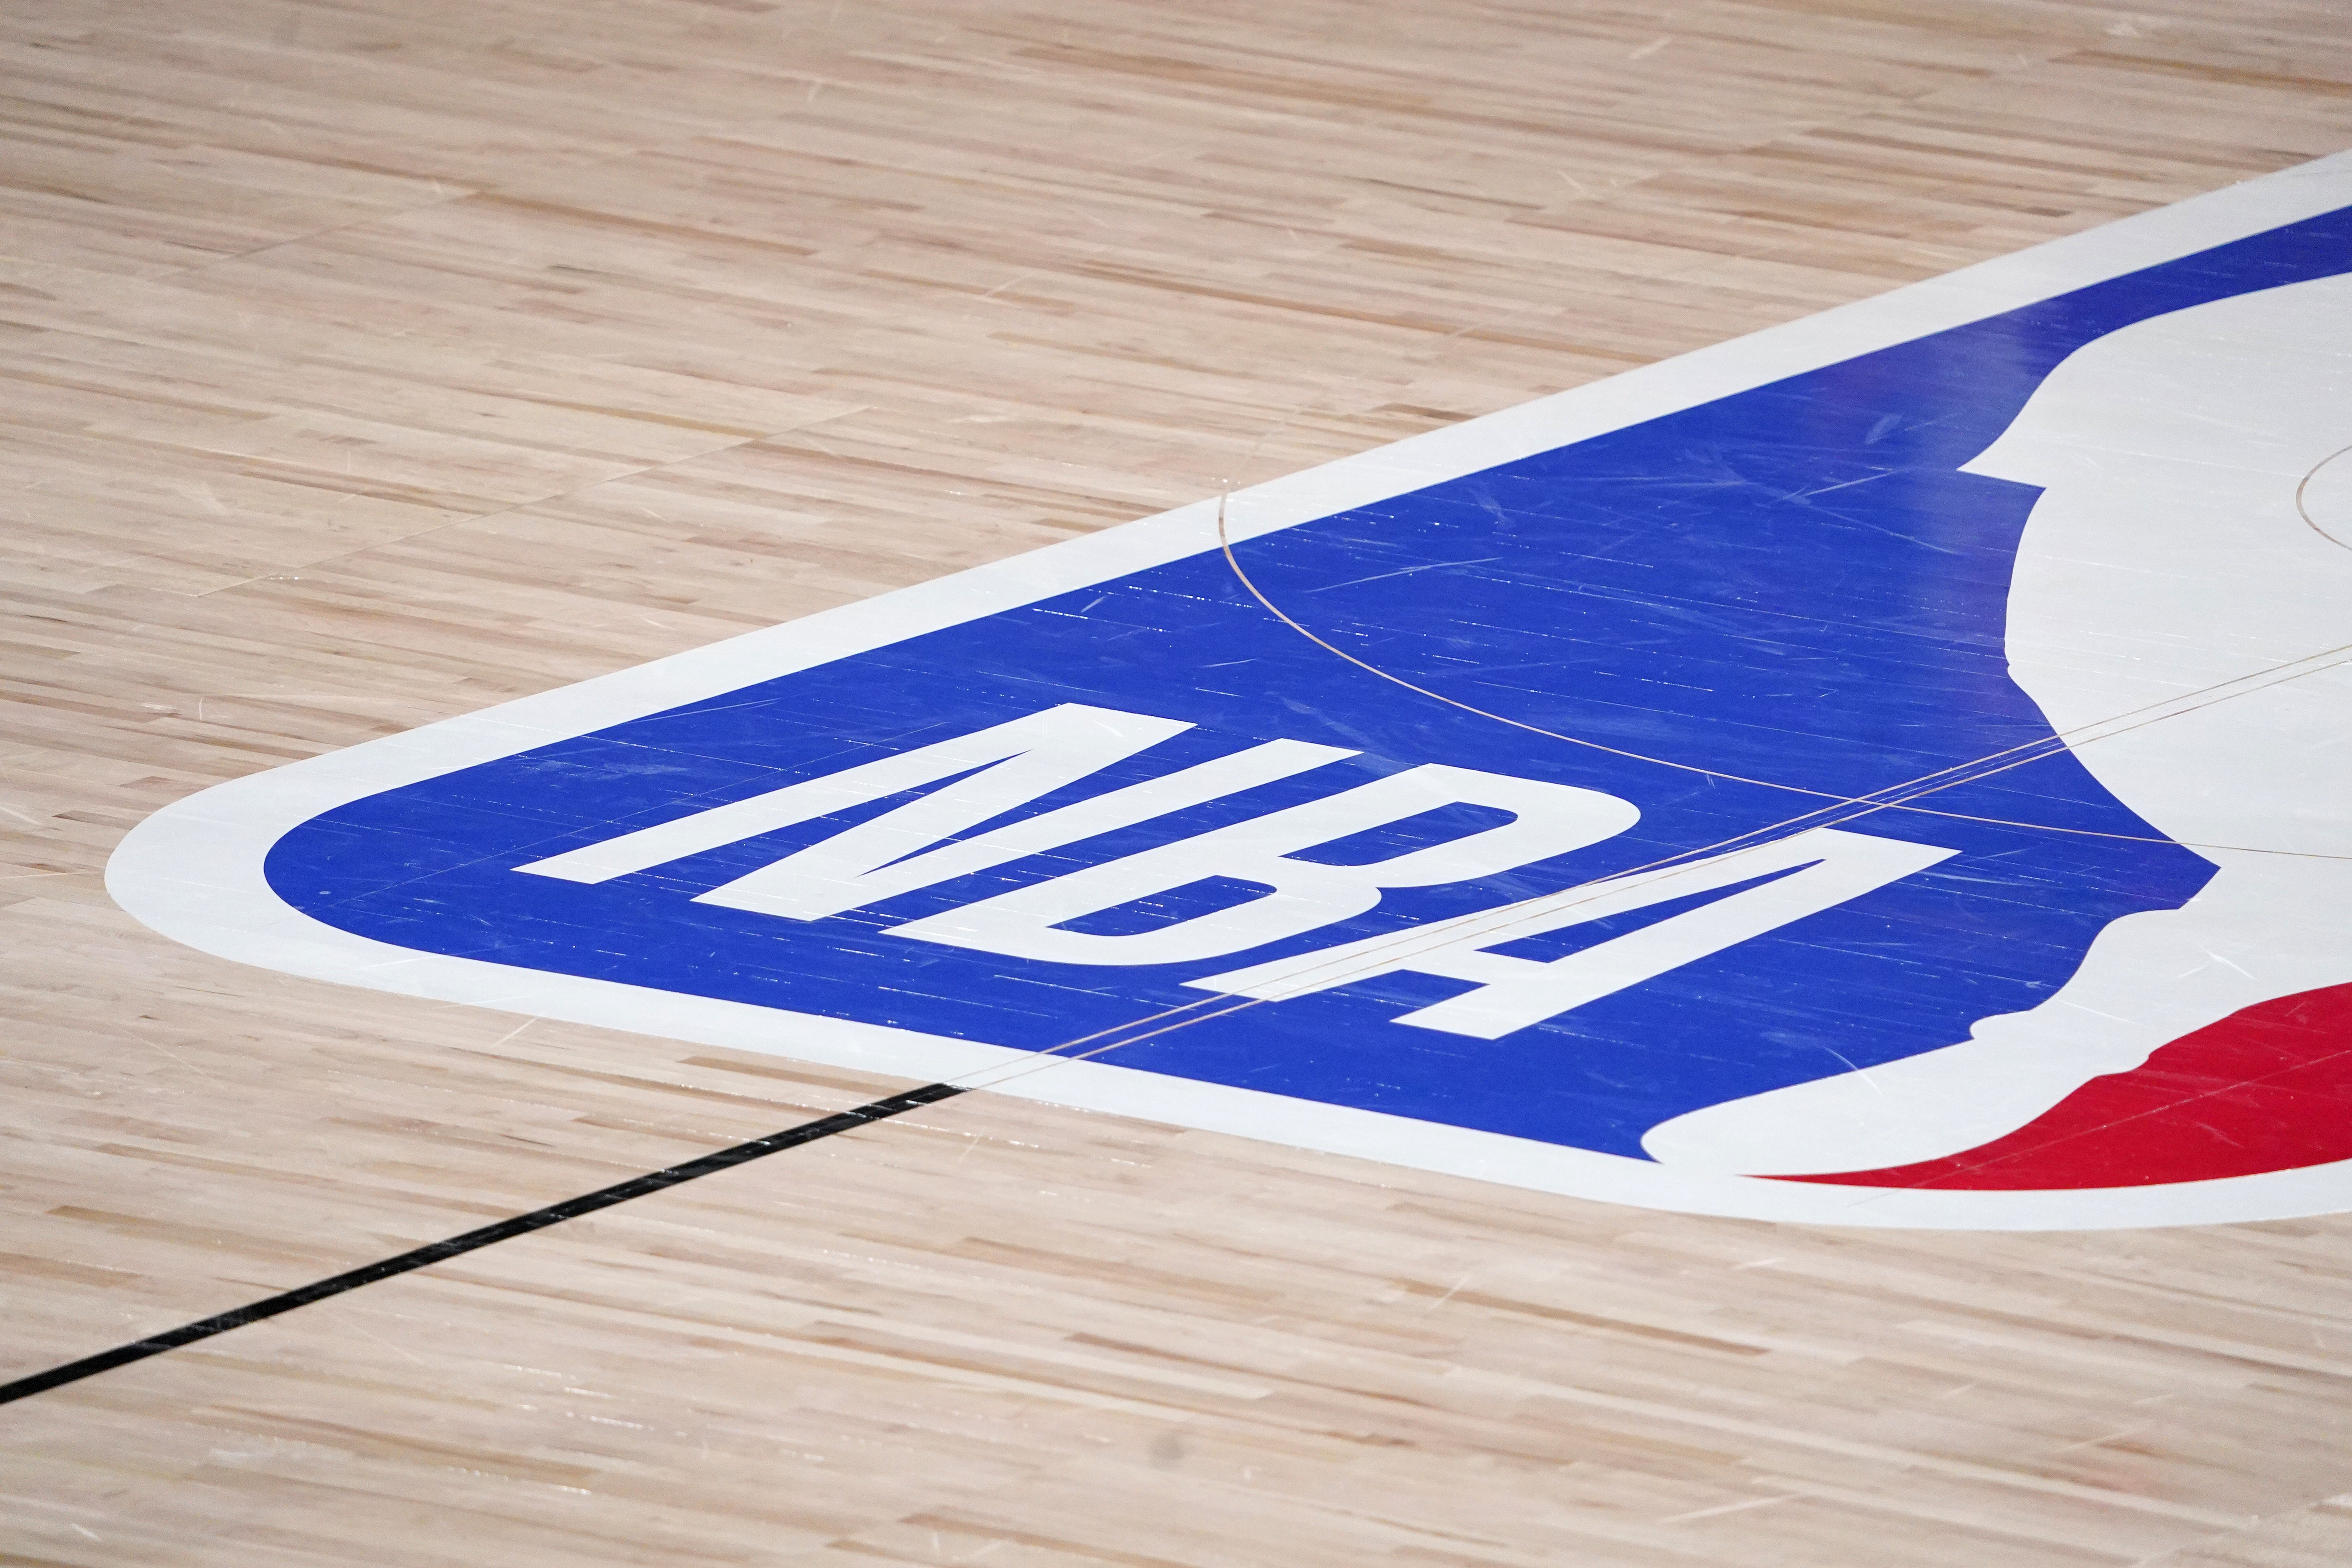 Nba Season Schedule 2022 Nba Schedule 2022: Regular Season, Playoffs, Finals And Key Dates  Reportedly Revealed | Bleacher Report | Latest News, Videos And Highlights